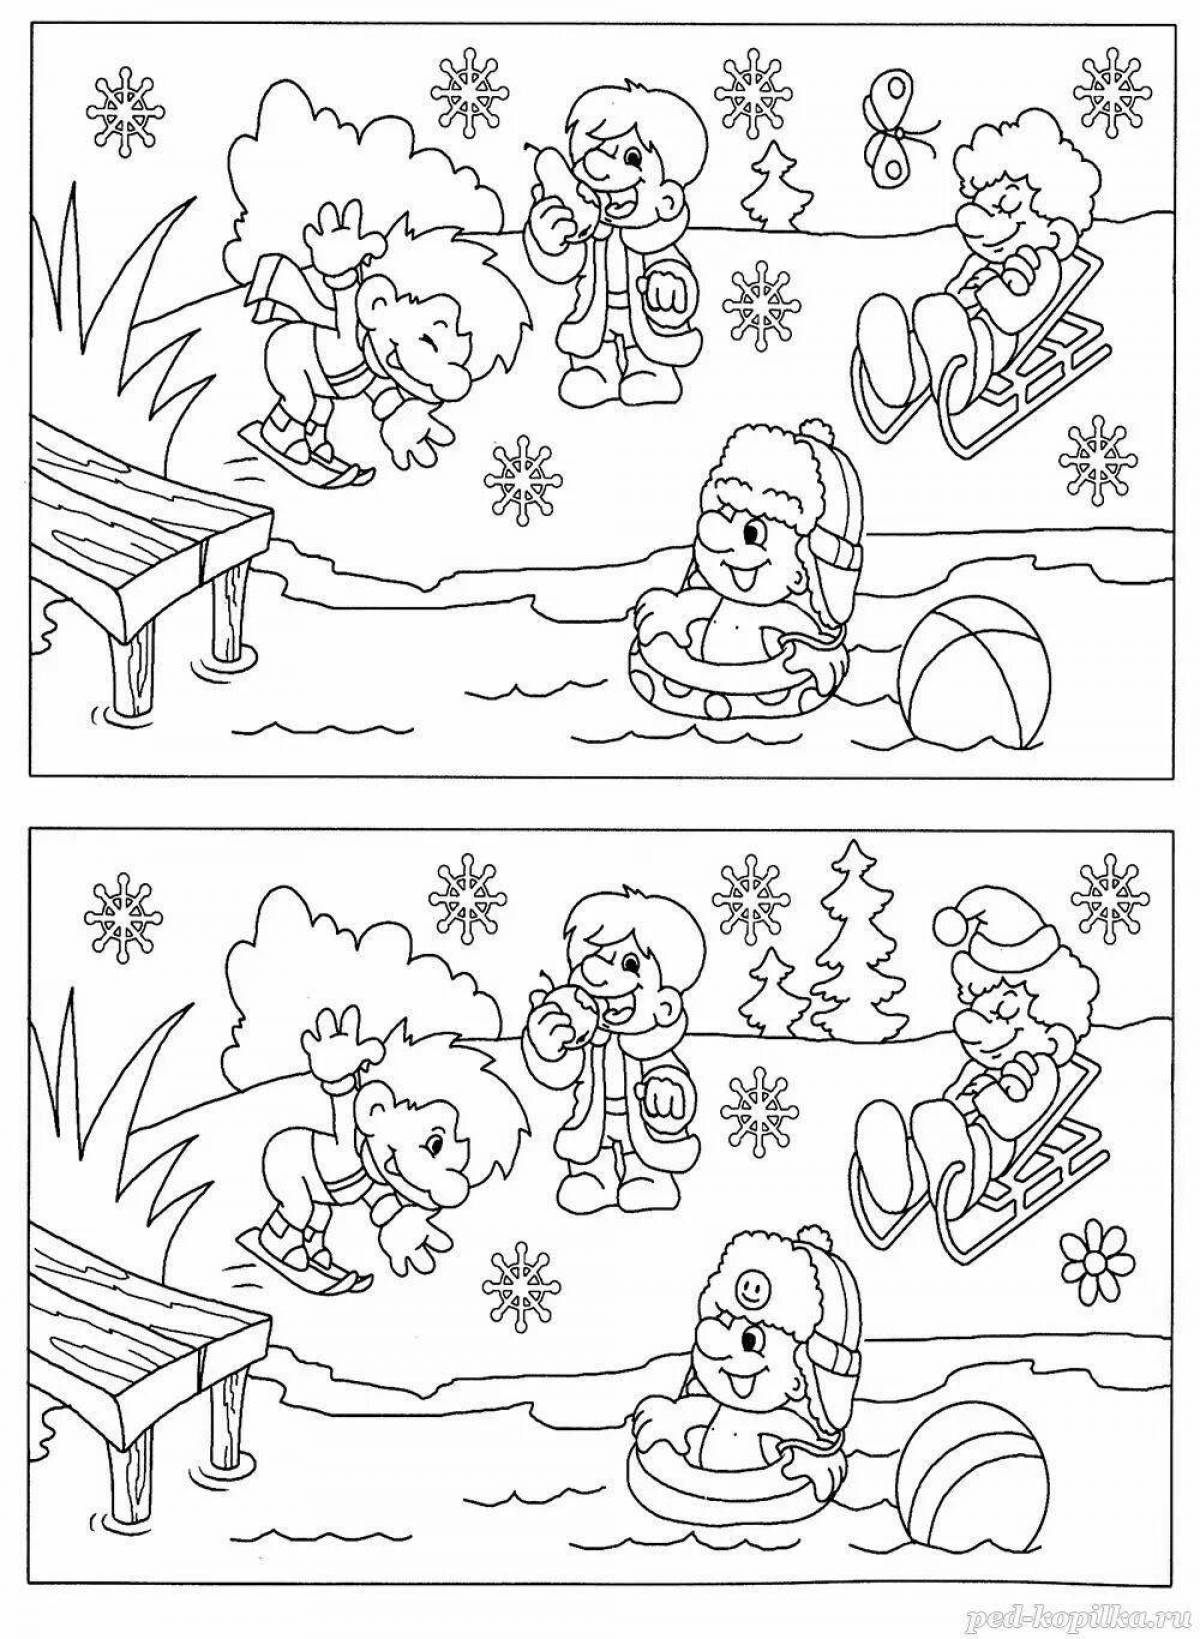 Elegant coloring book signs of winter for children